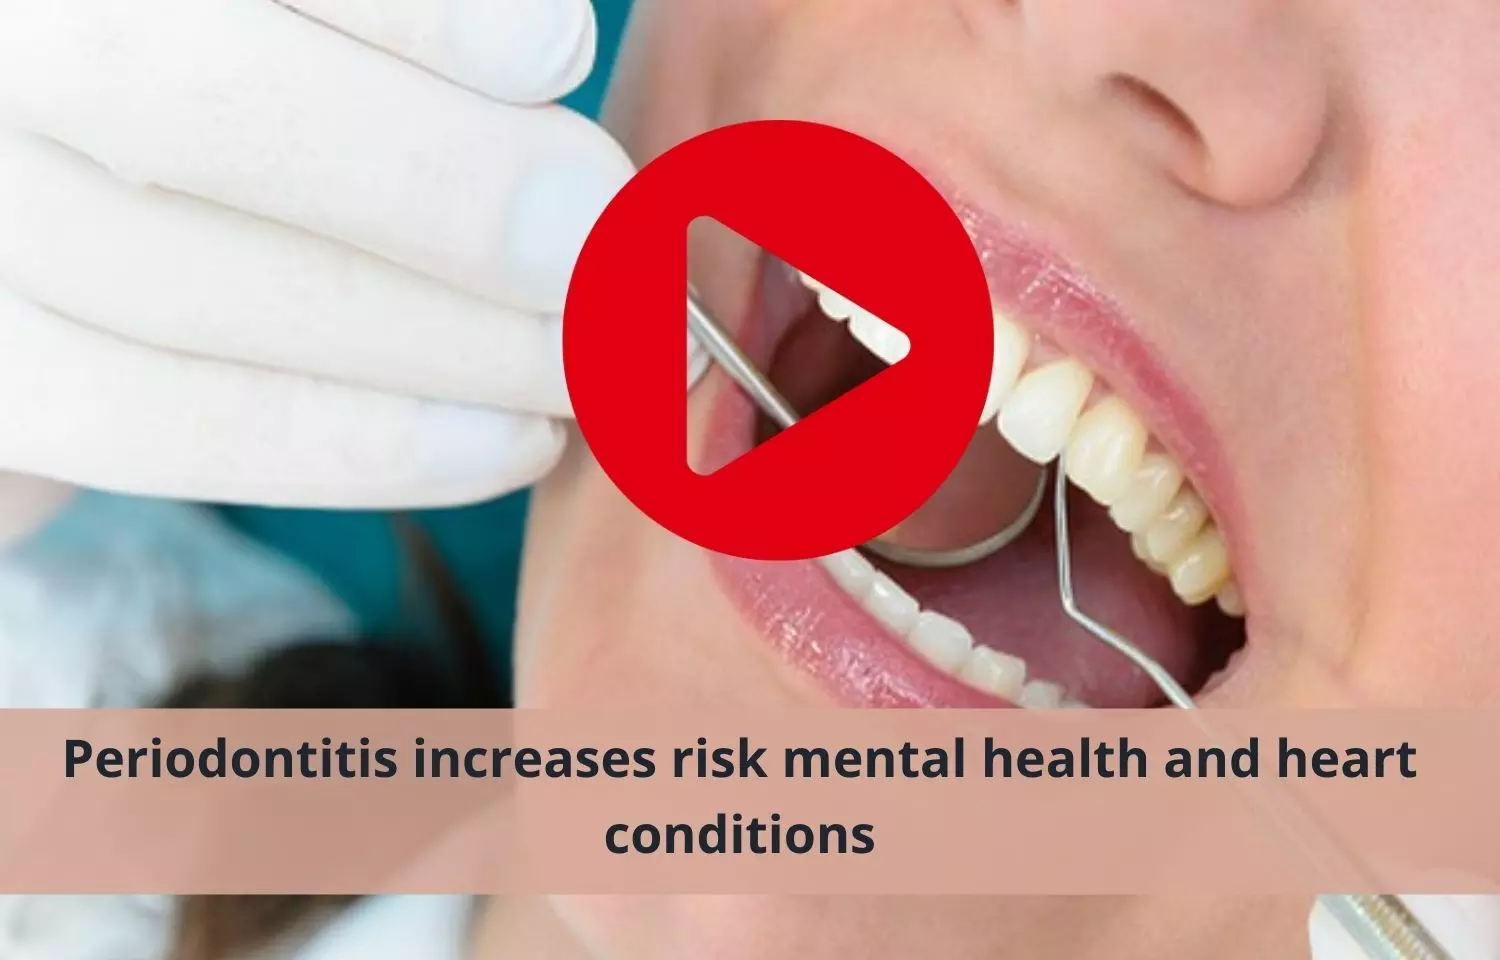 Risk of mental health and heart conditions higher with Periodontitis